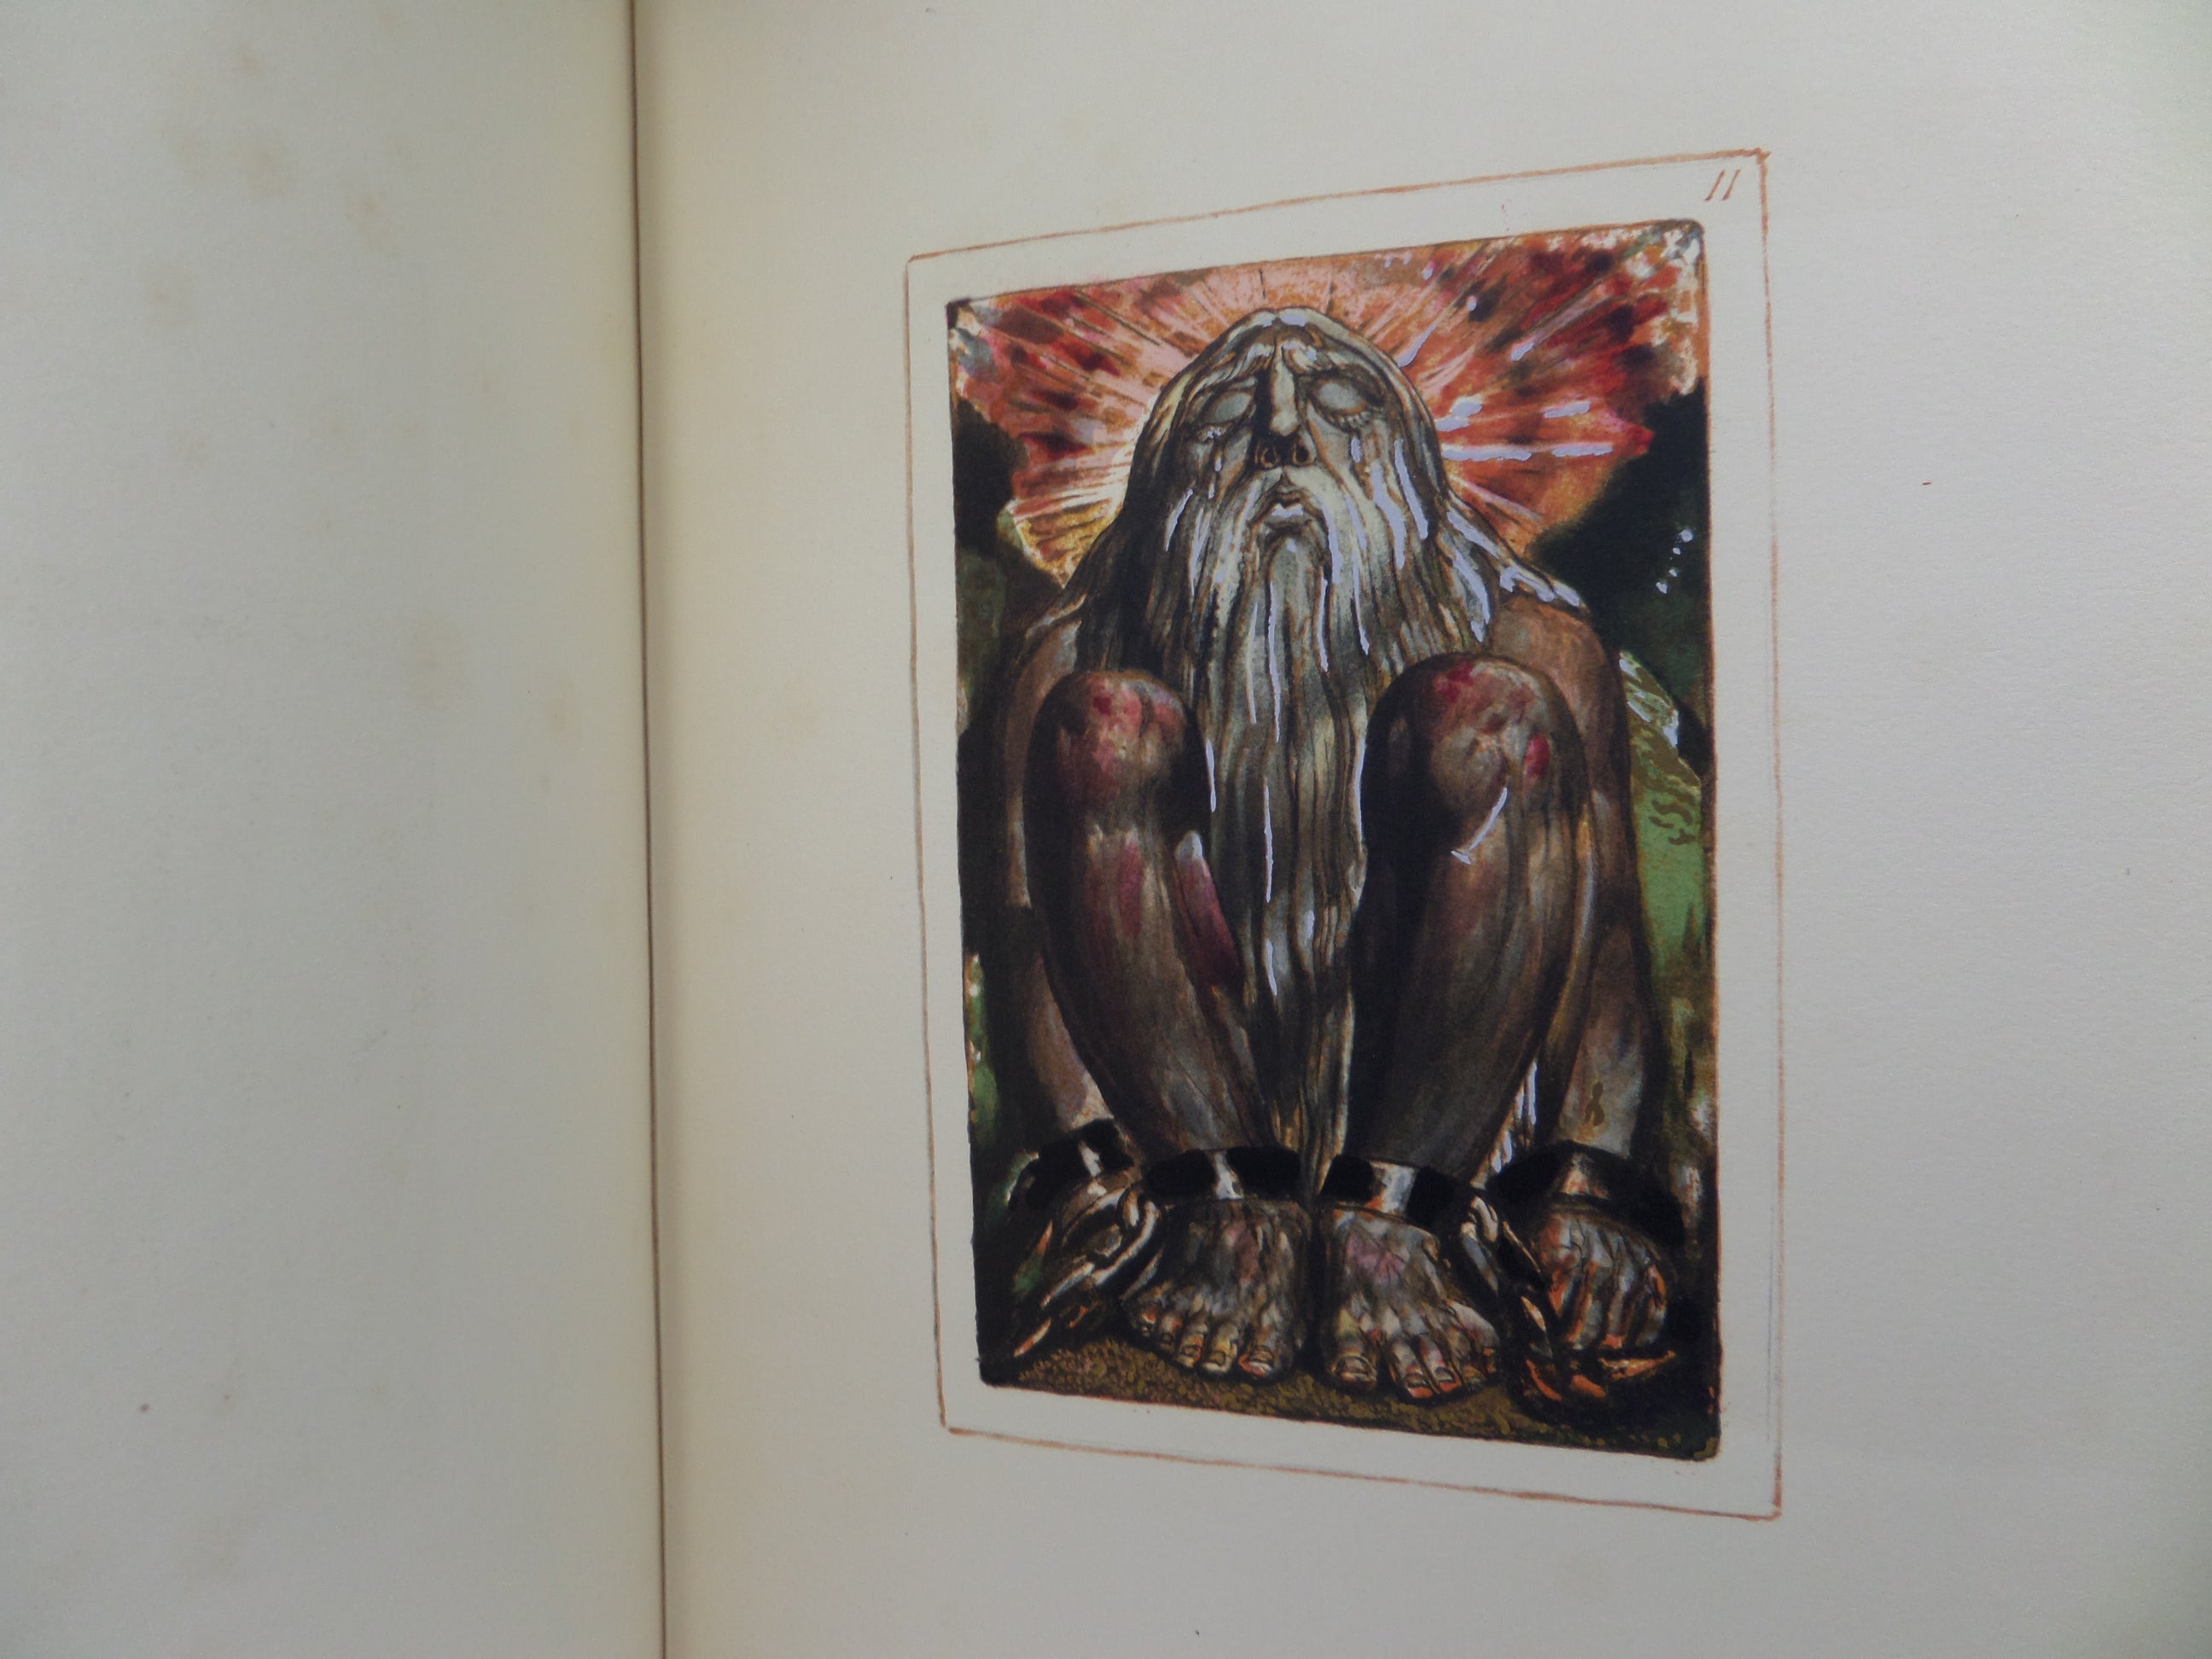 THE BOOK OF URIZEN BY WILLIAM BLAKE 1958 LIMITED EDITION